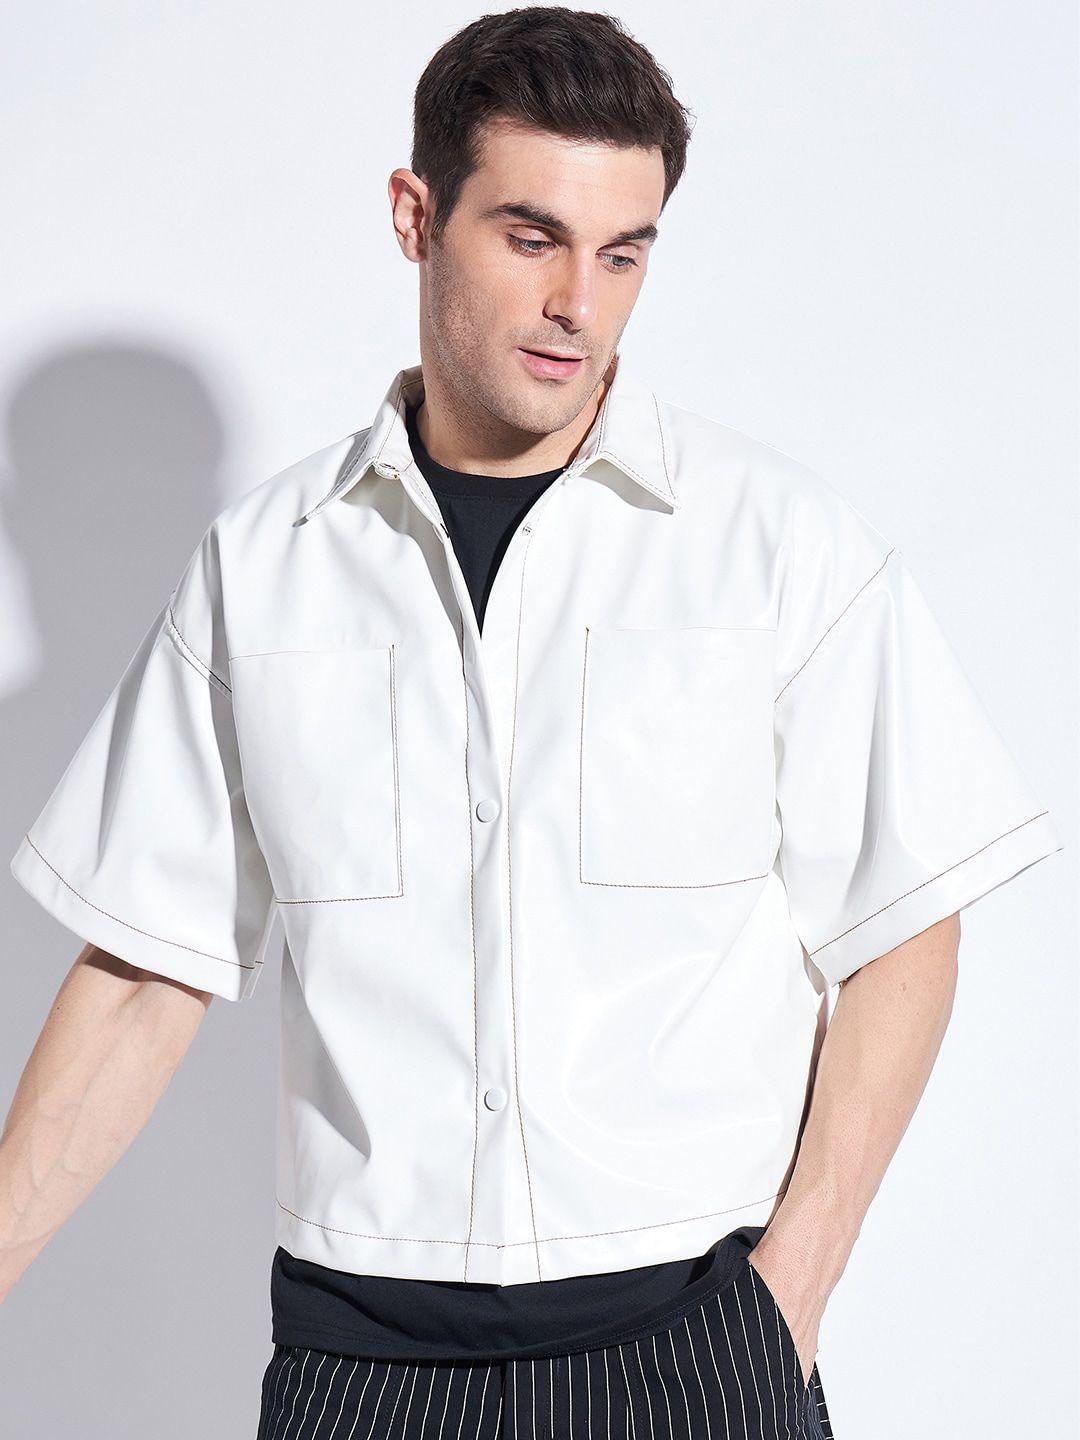 fugazee-relaxed-oversized-spread-collar-cotton-casual-shirt